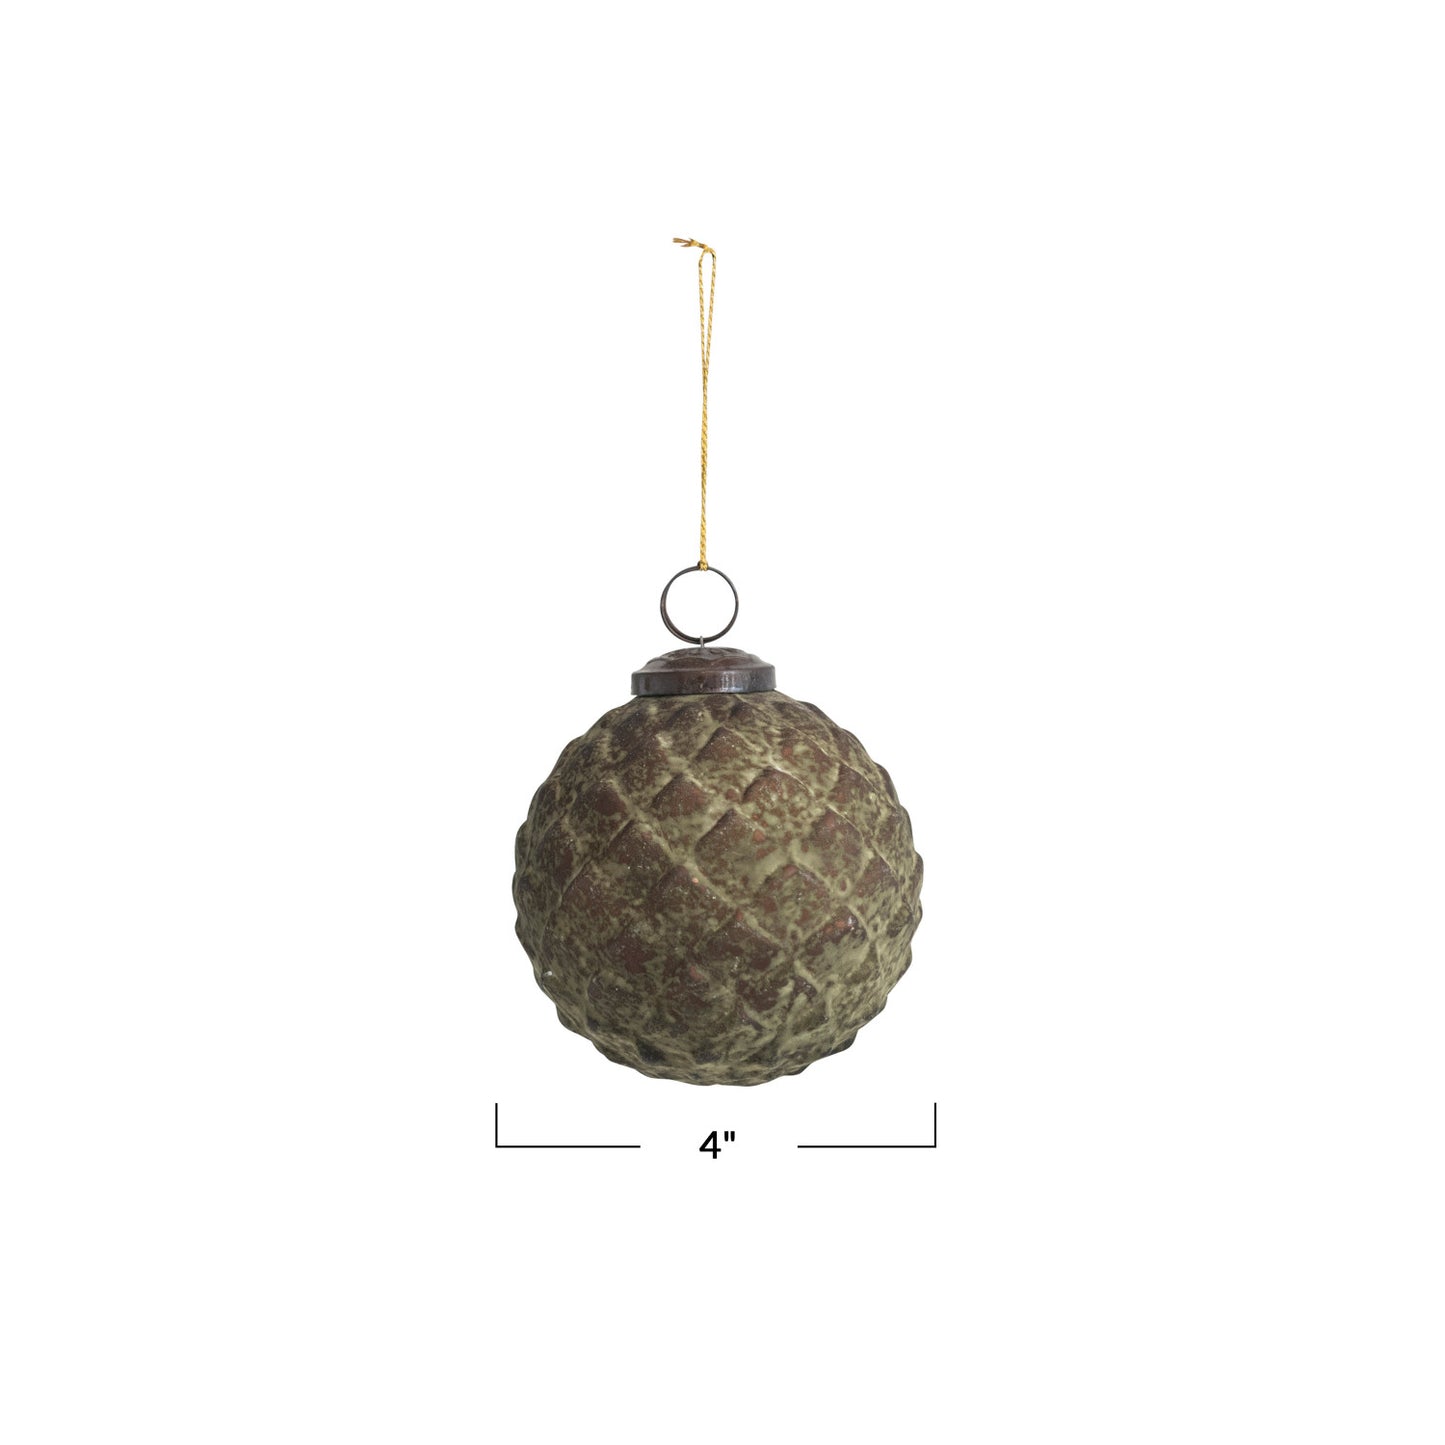 Embossed Glass Ball Ornament, Distressed Green Patina Finish